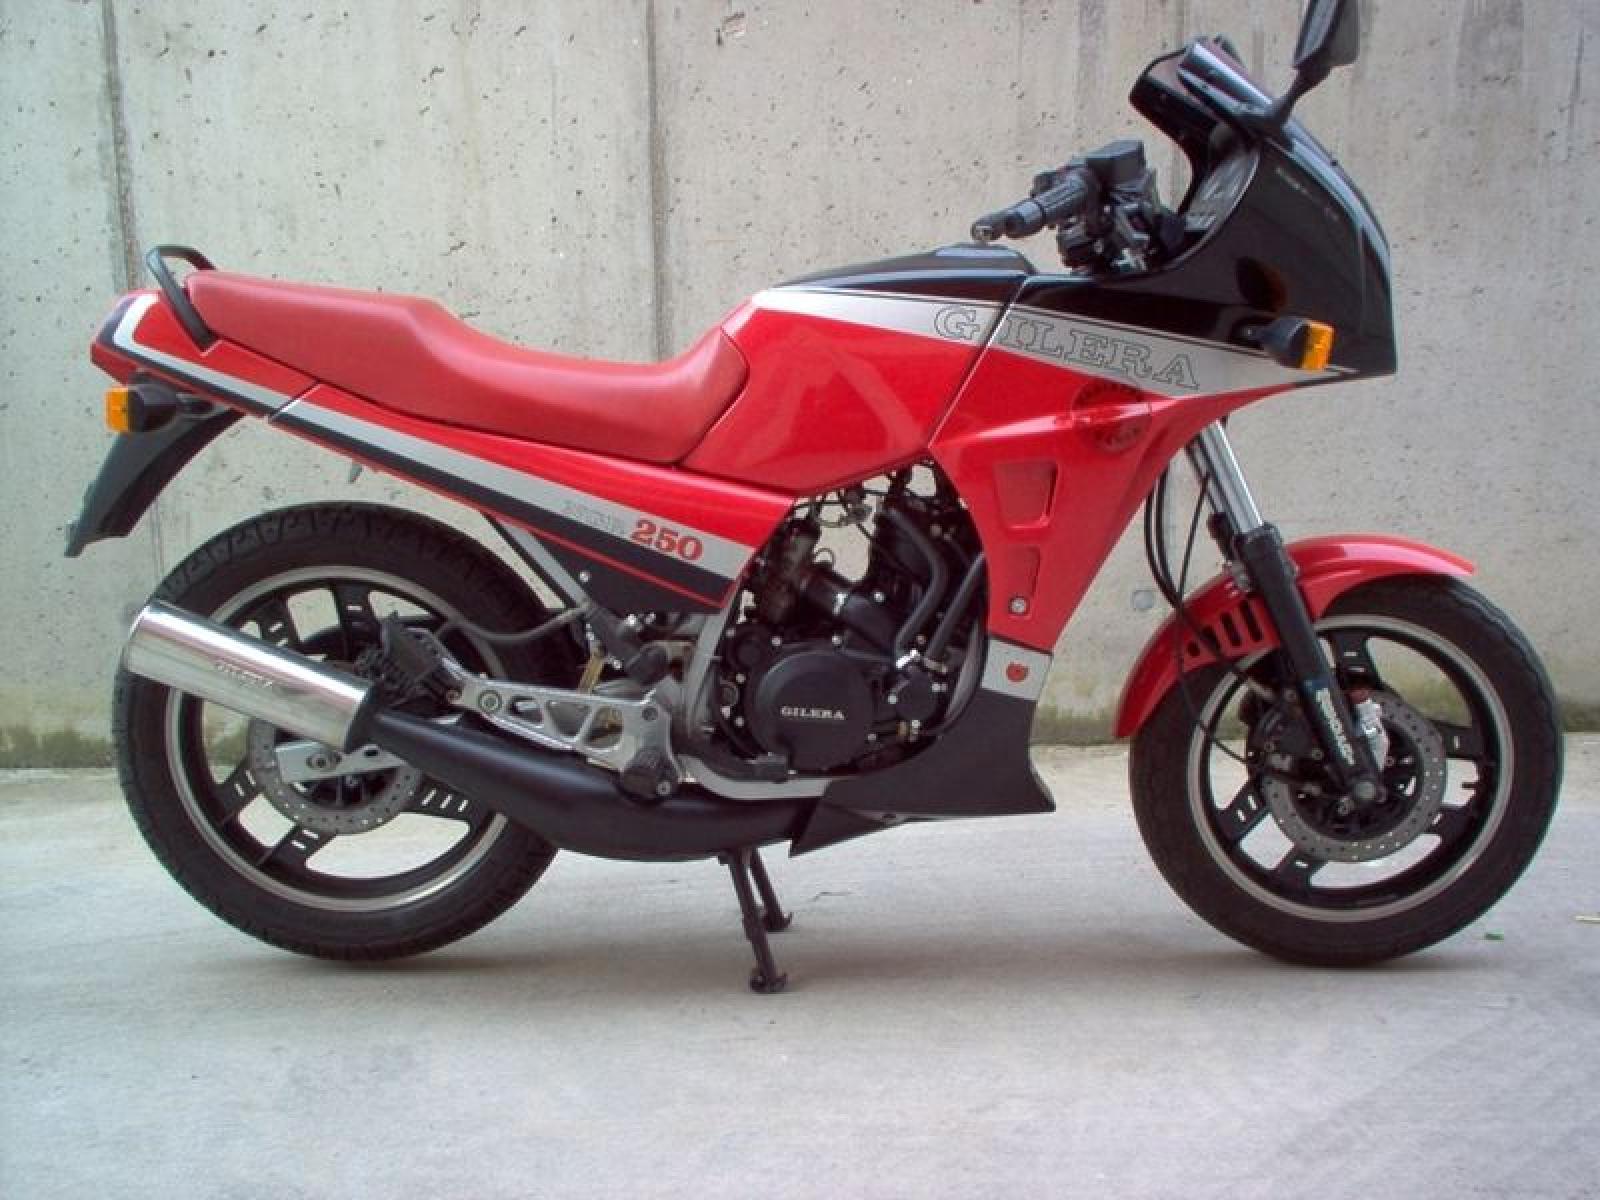 Gilera 250 NGR (reduced effect) 1988 photo - 3